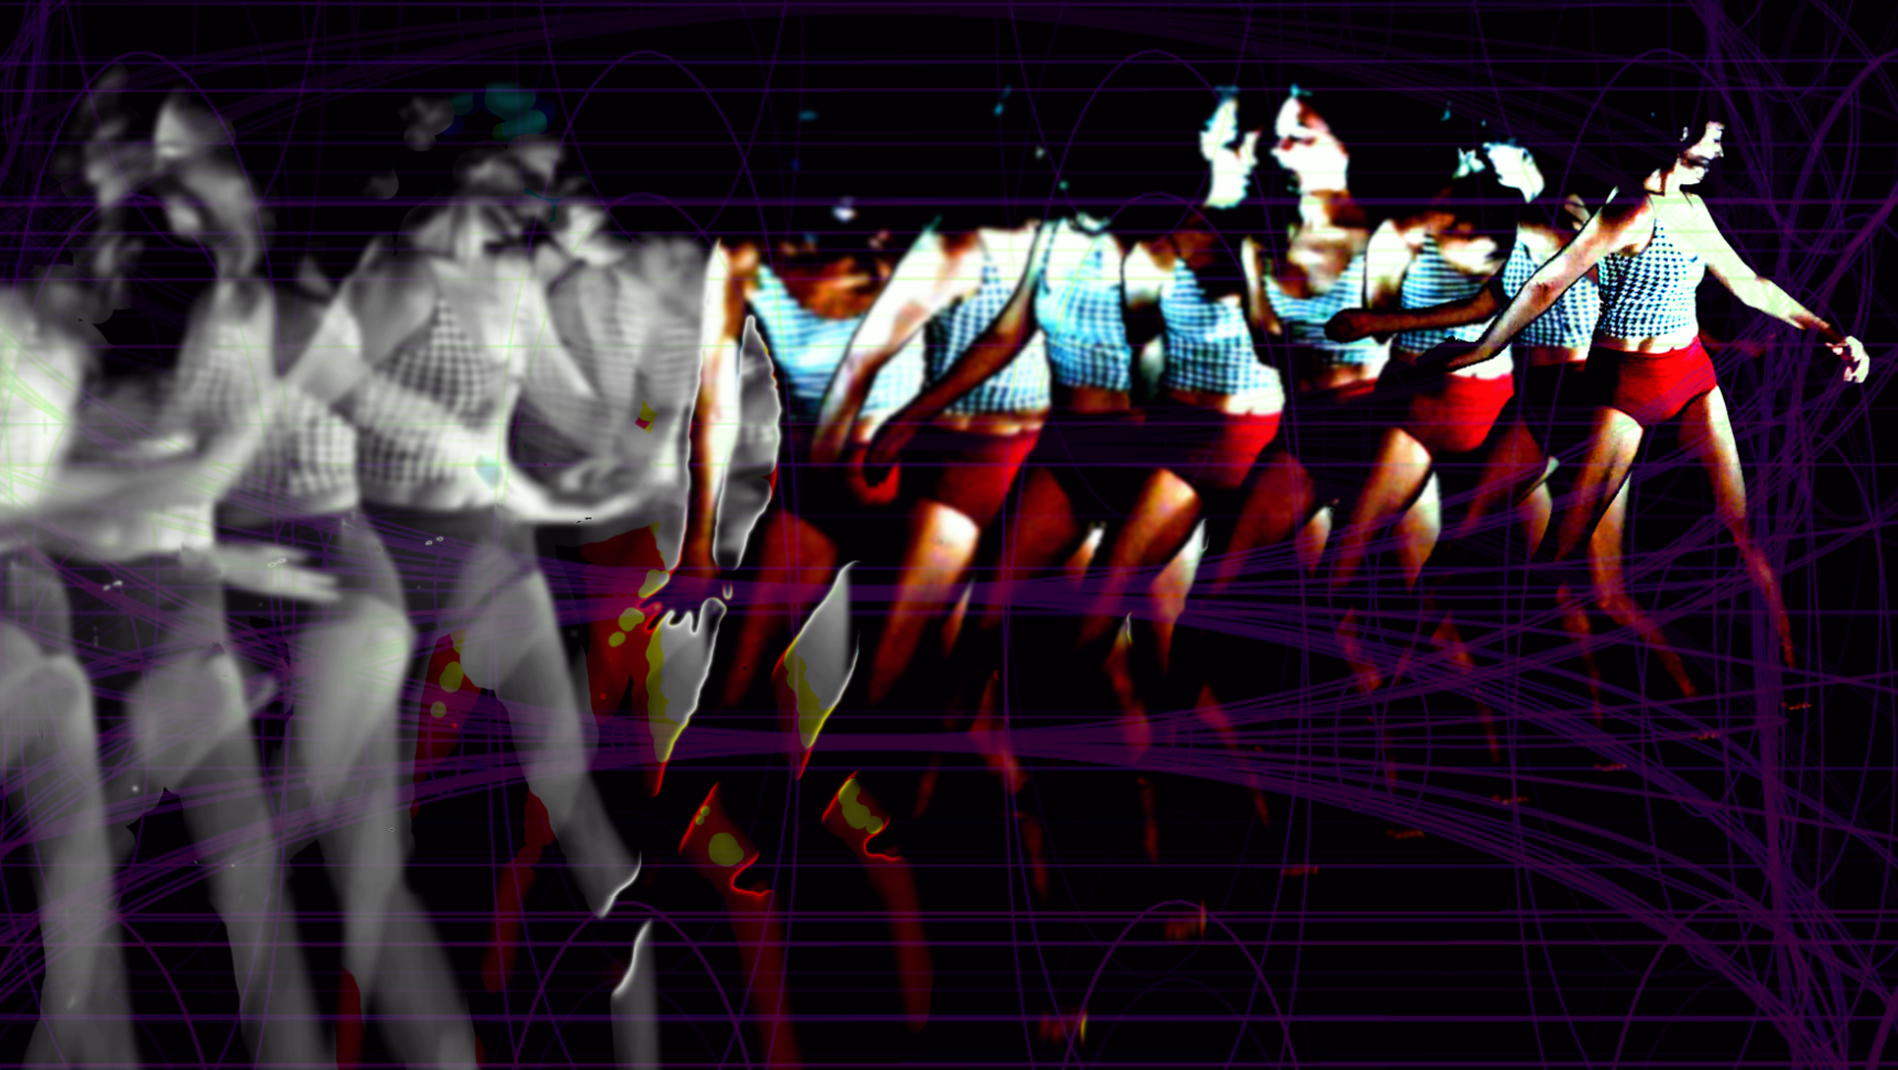 Replicated image of dancer twirling collaged together.